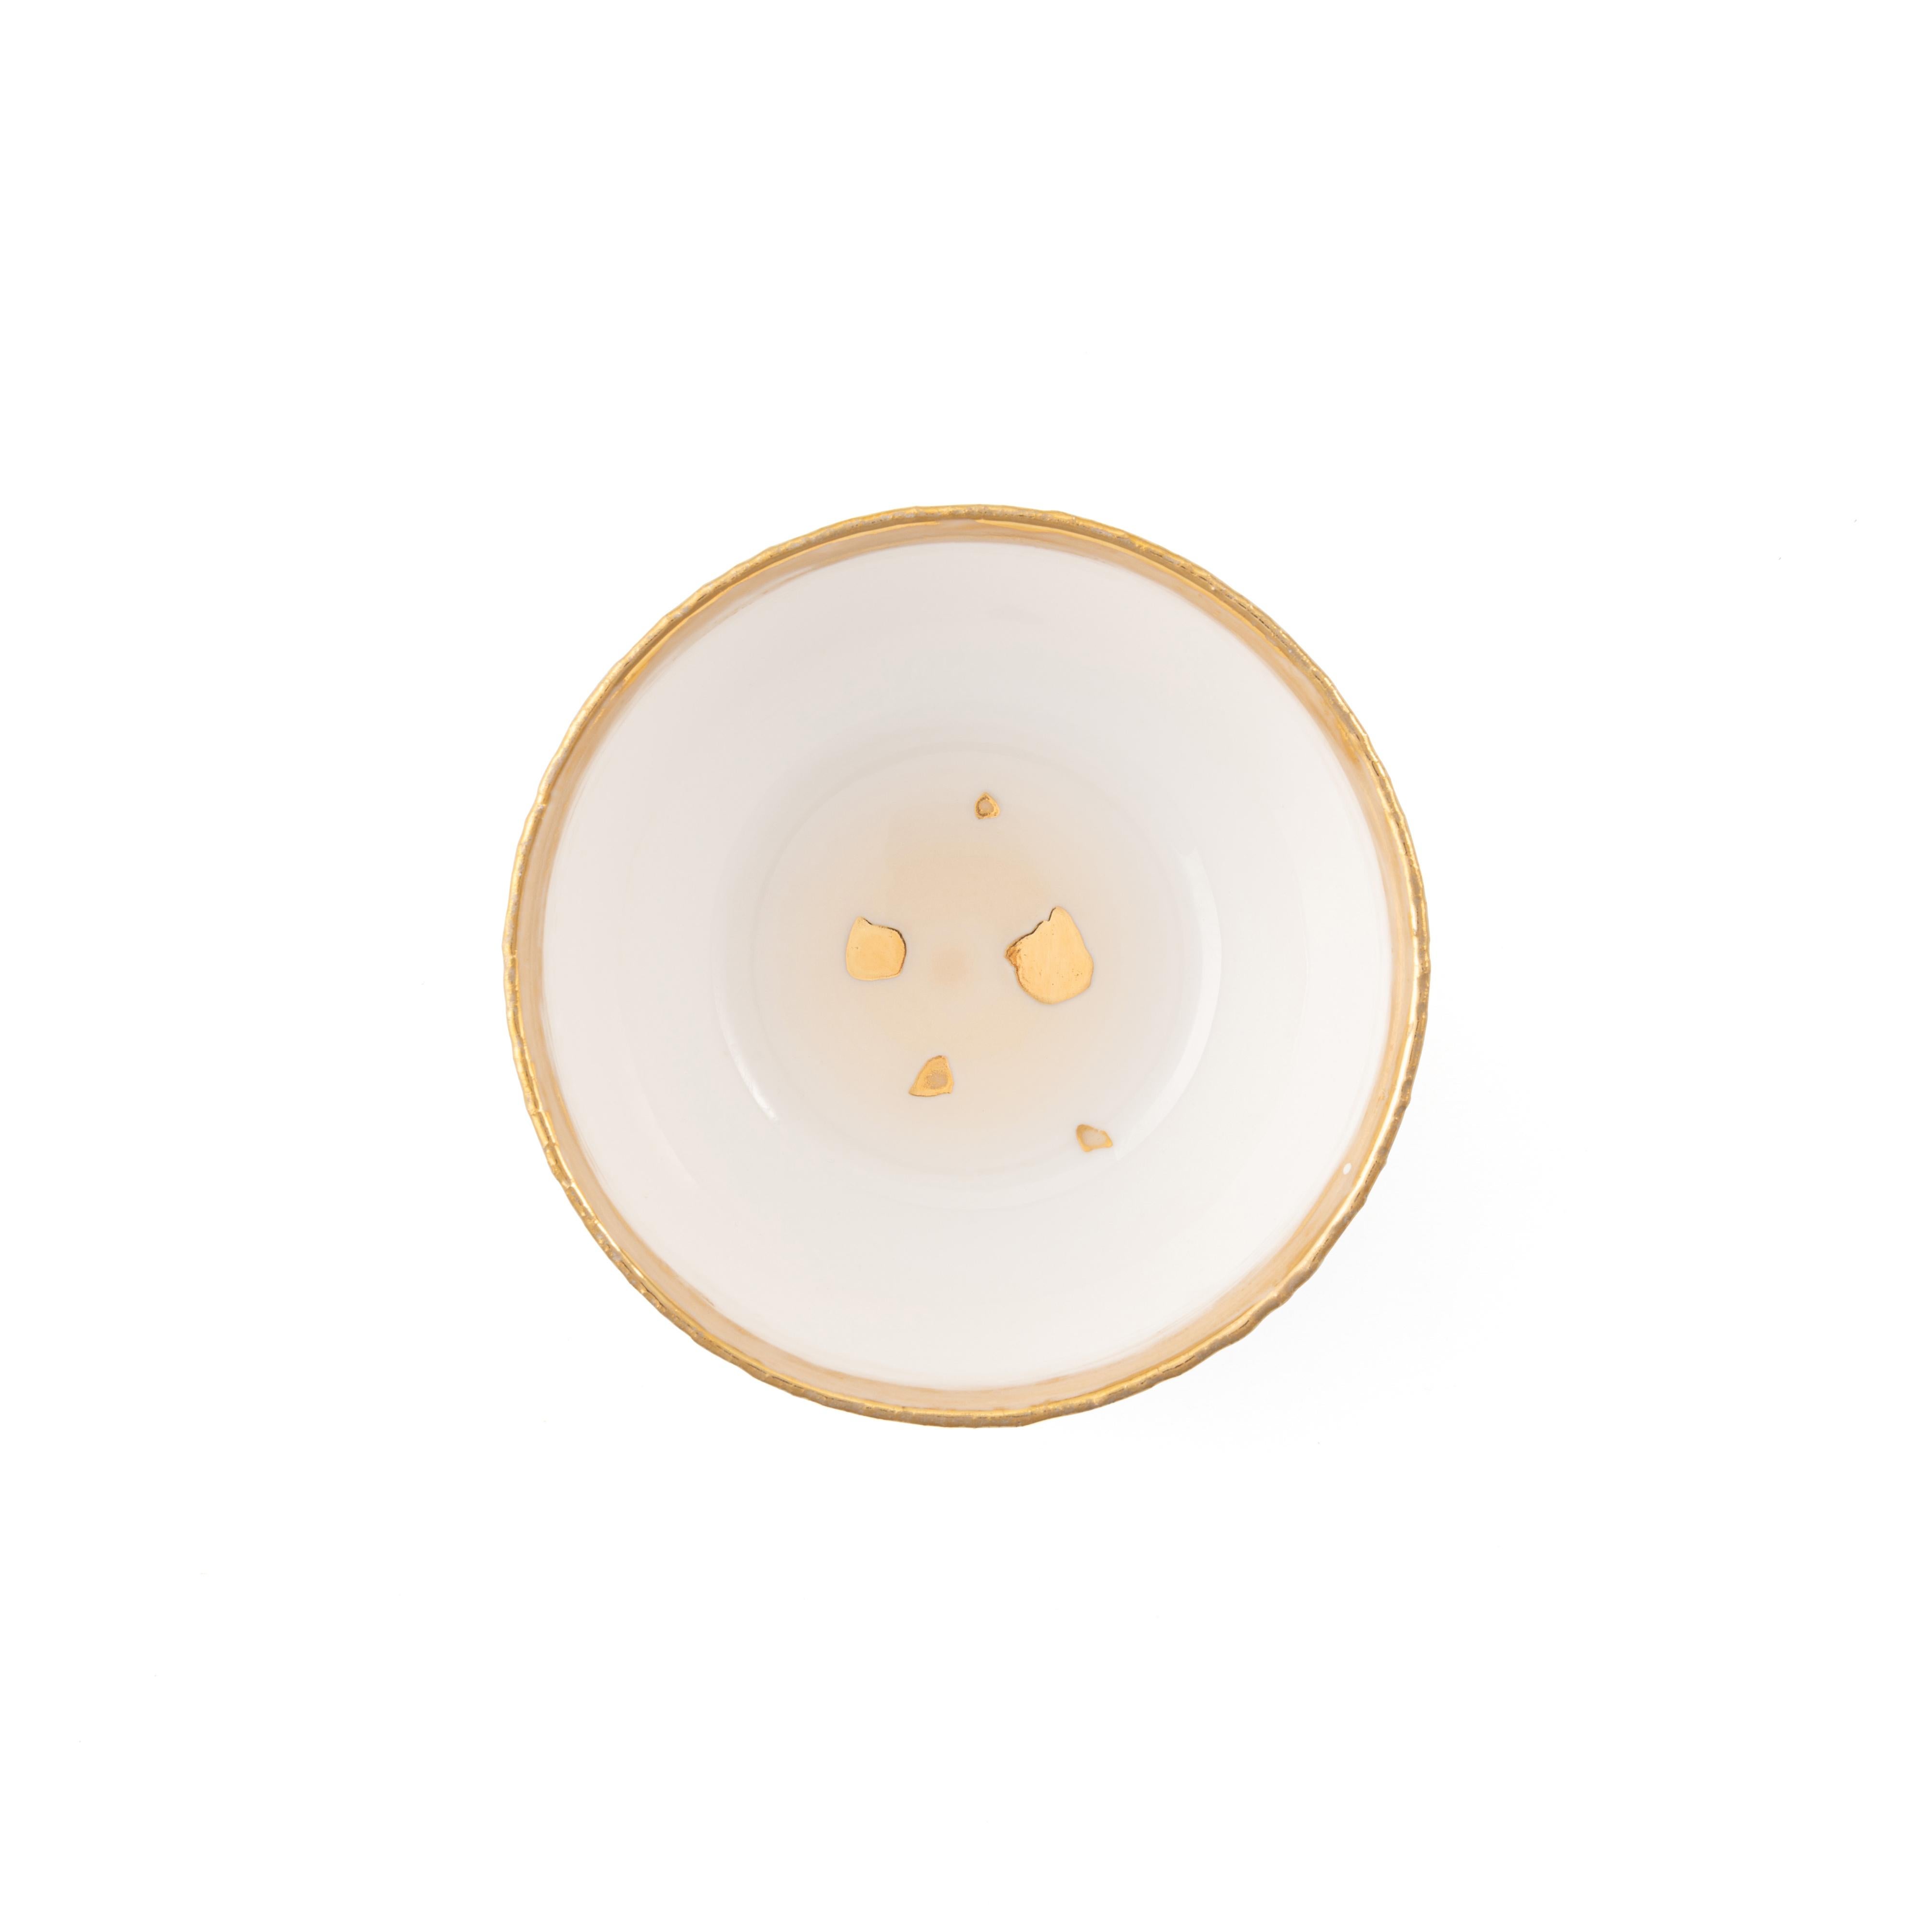 Michelangelo Bianco is an elegant tableware ideally suited for formal occasions and intimate events. Plates are decorated with a light beige enamel at the center. They feature a new, exclusive golden edge with a precious, slightly rough feeling at